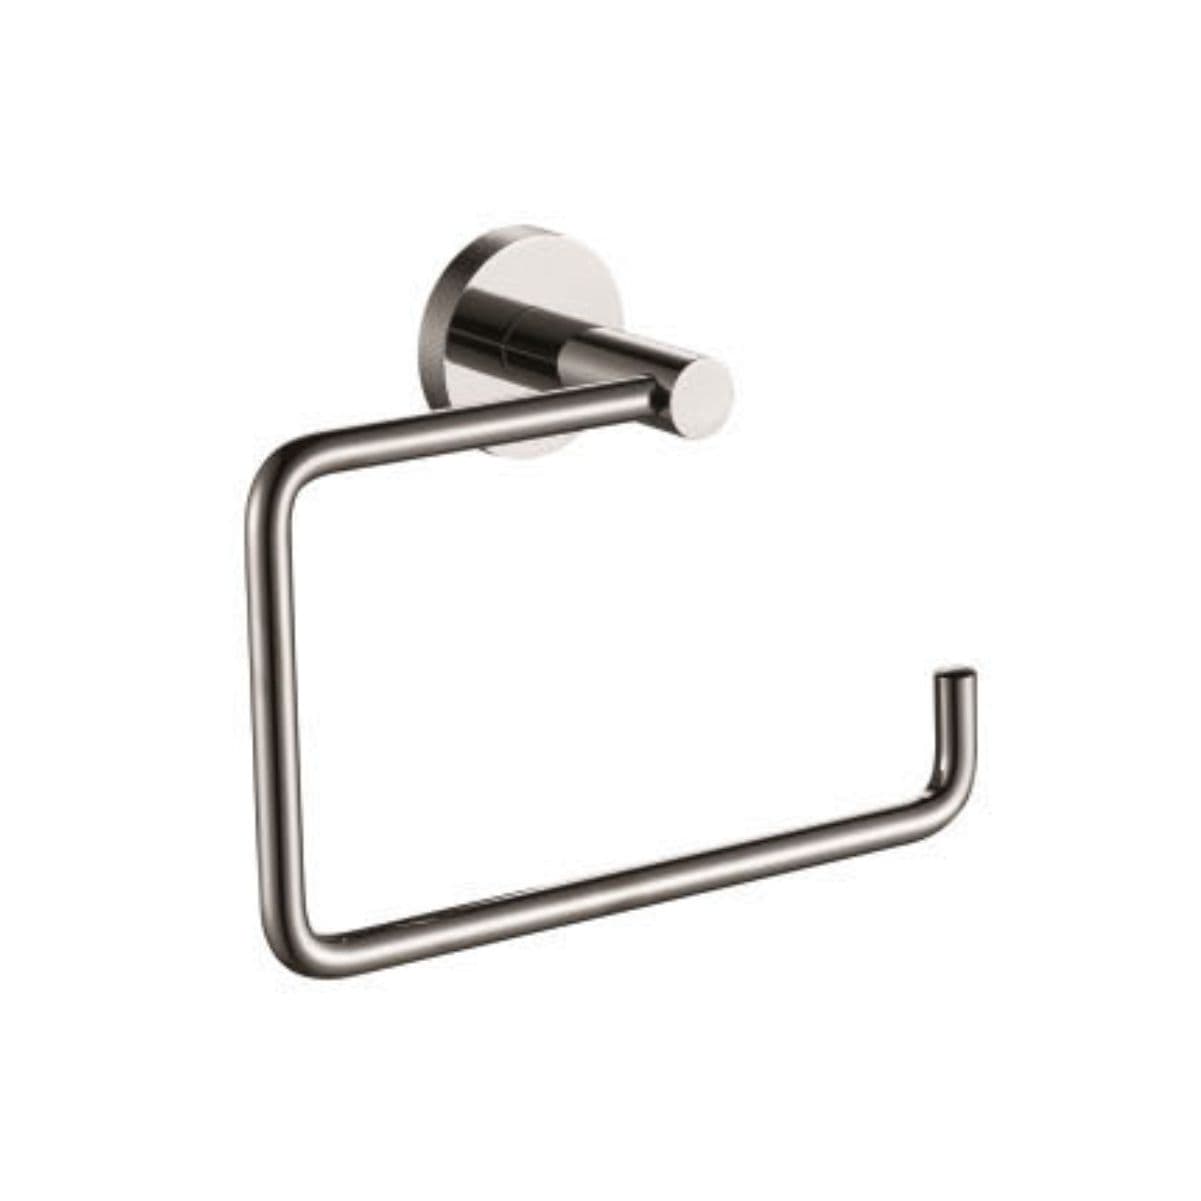 ACCESSORIES Towel Ring Nickle Polish - Colston Accessories - Towel Ring